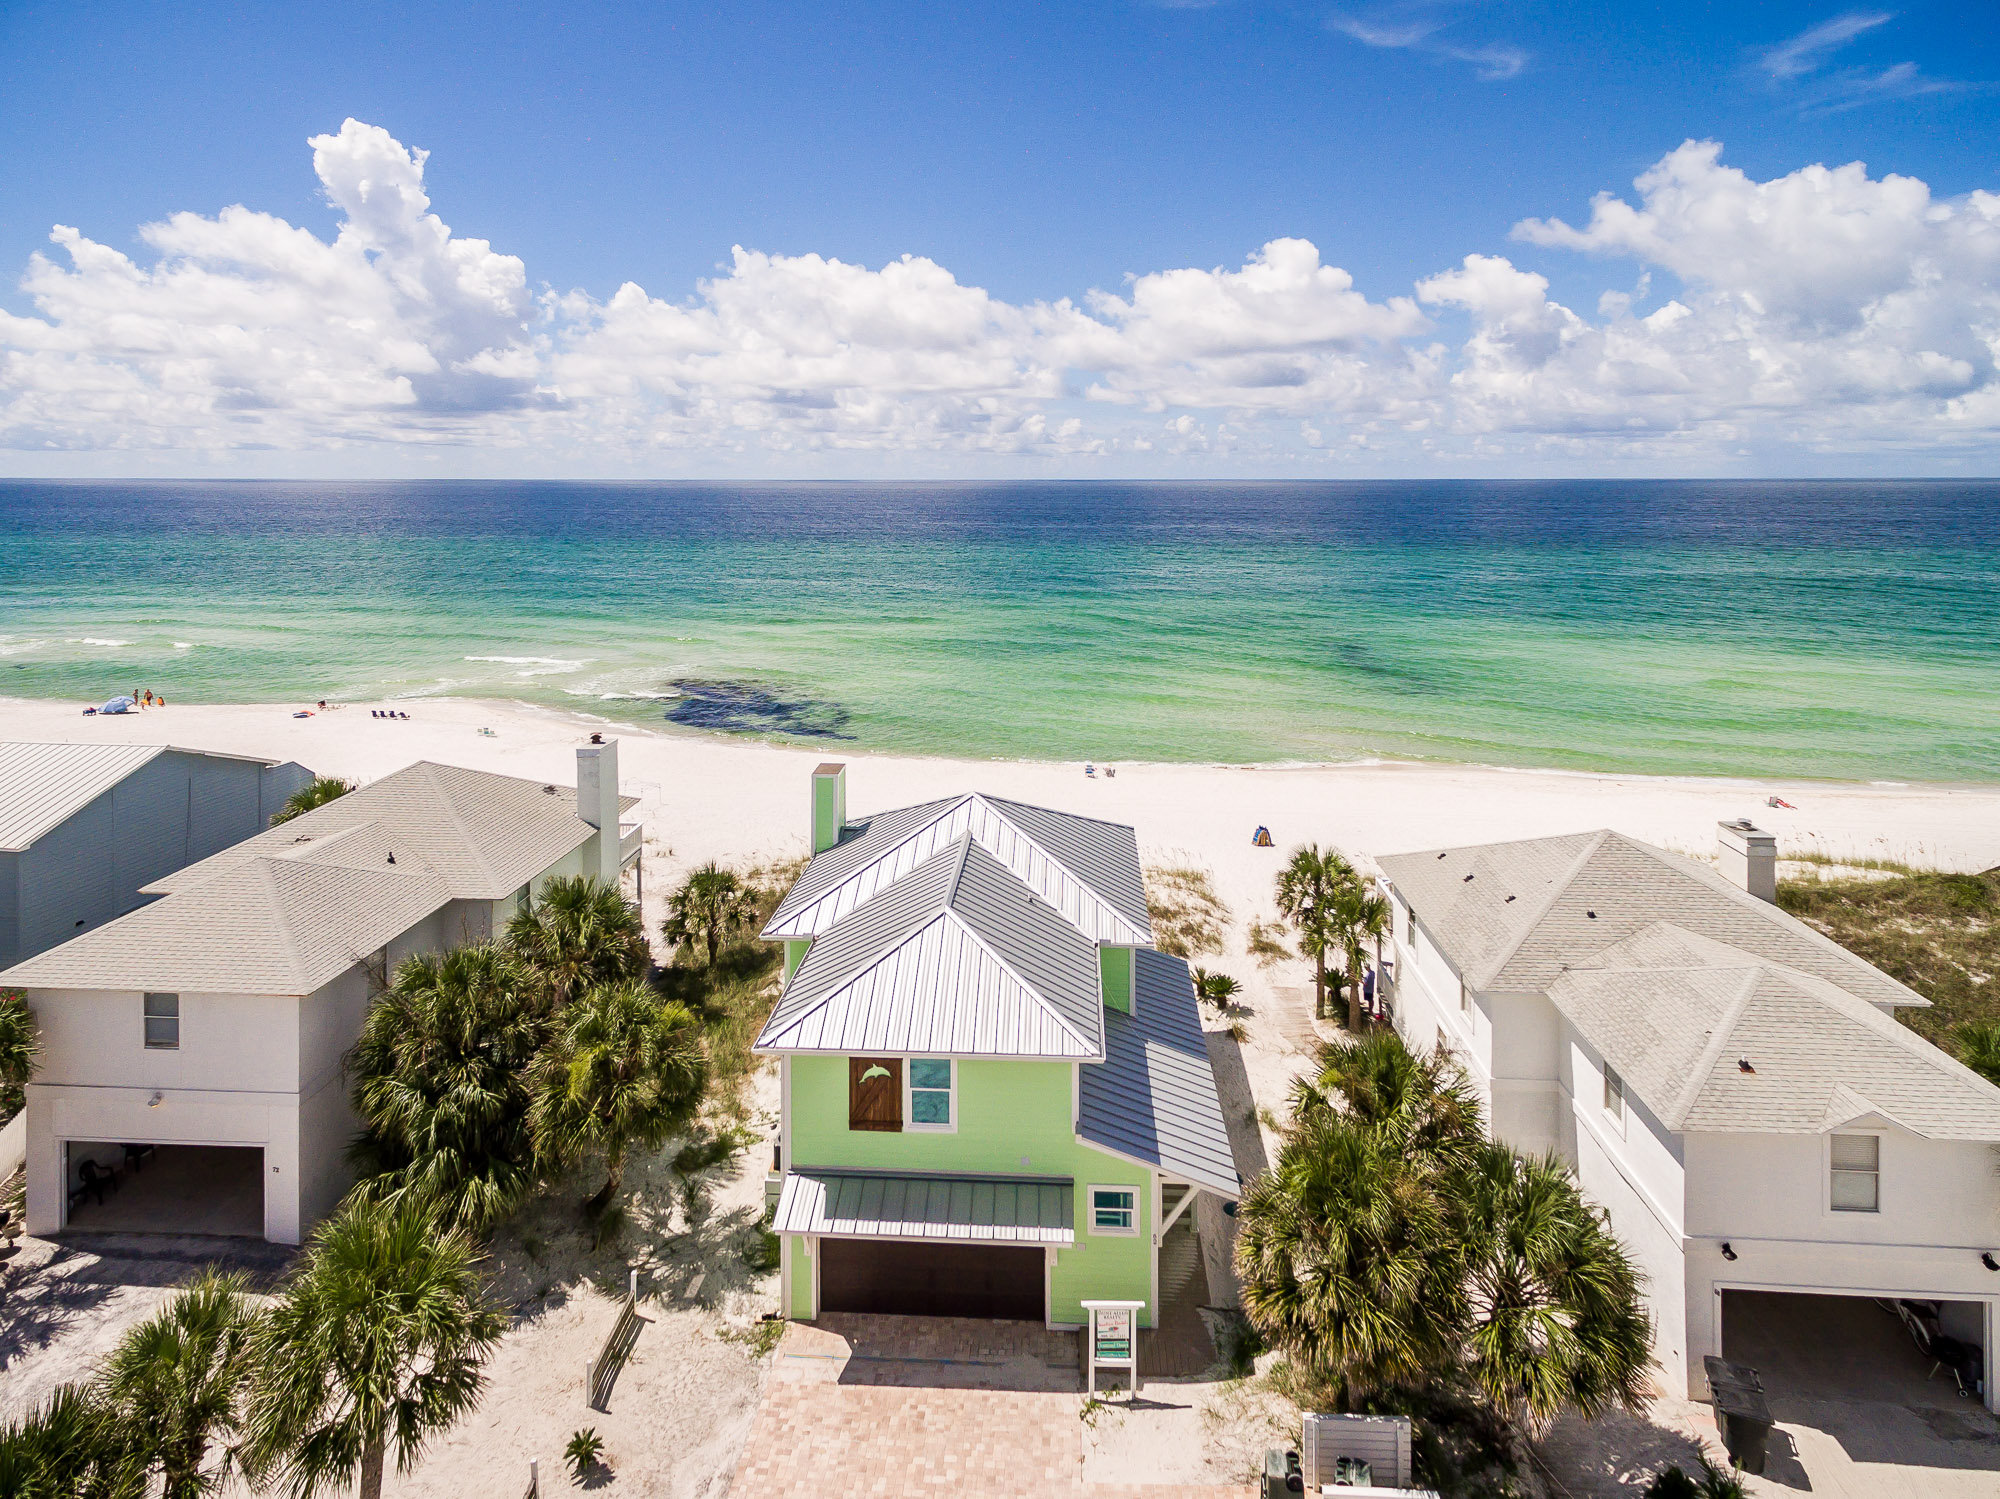 Photo of Diamond Dunes, a rental House located in Inlet Beach